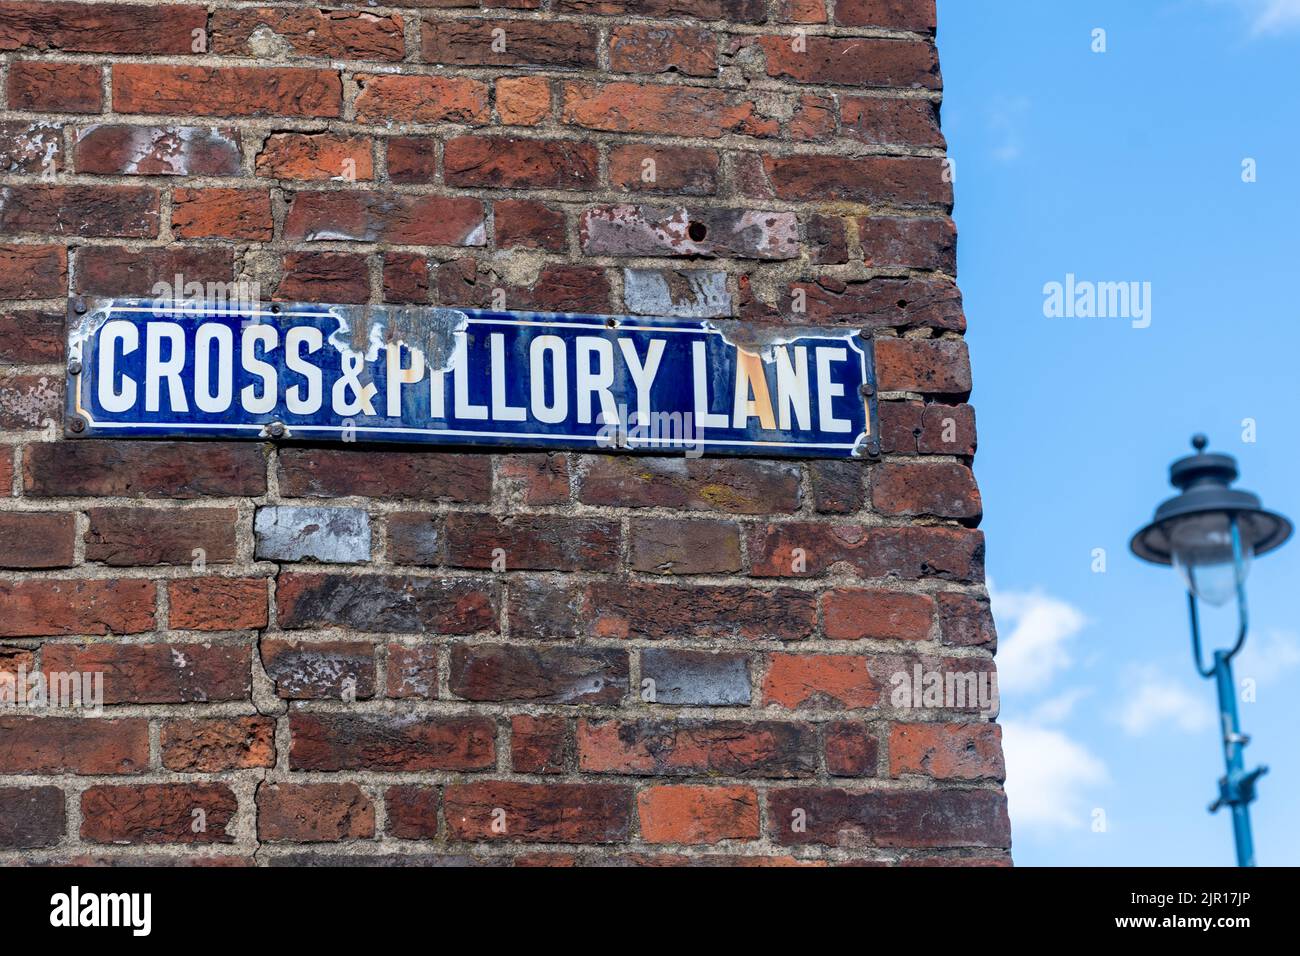 Cross & Pillory Lane, unusual road sign with name associated with historic form of punishment Stock Photo